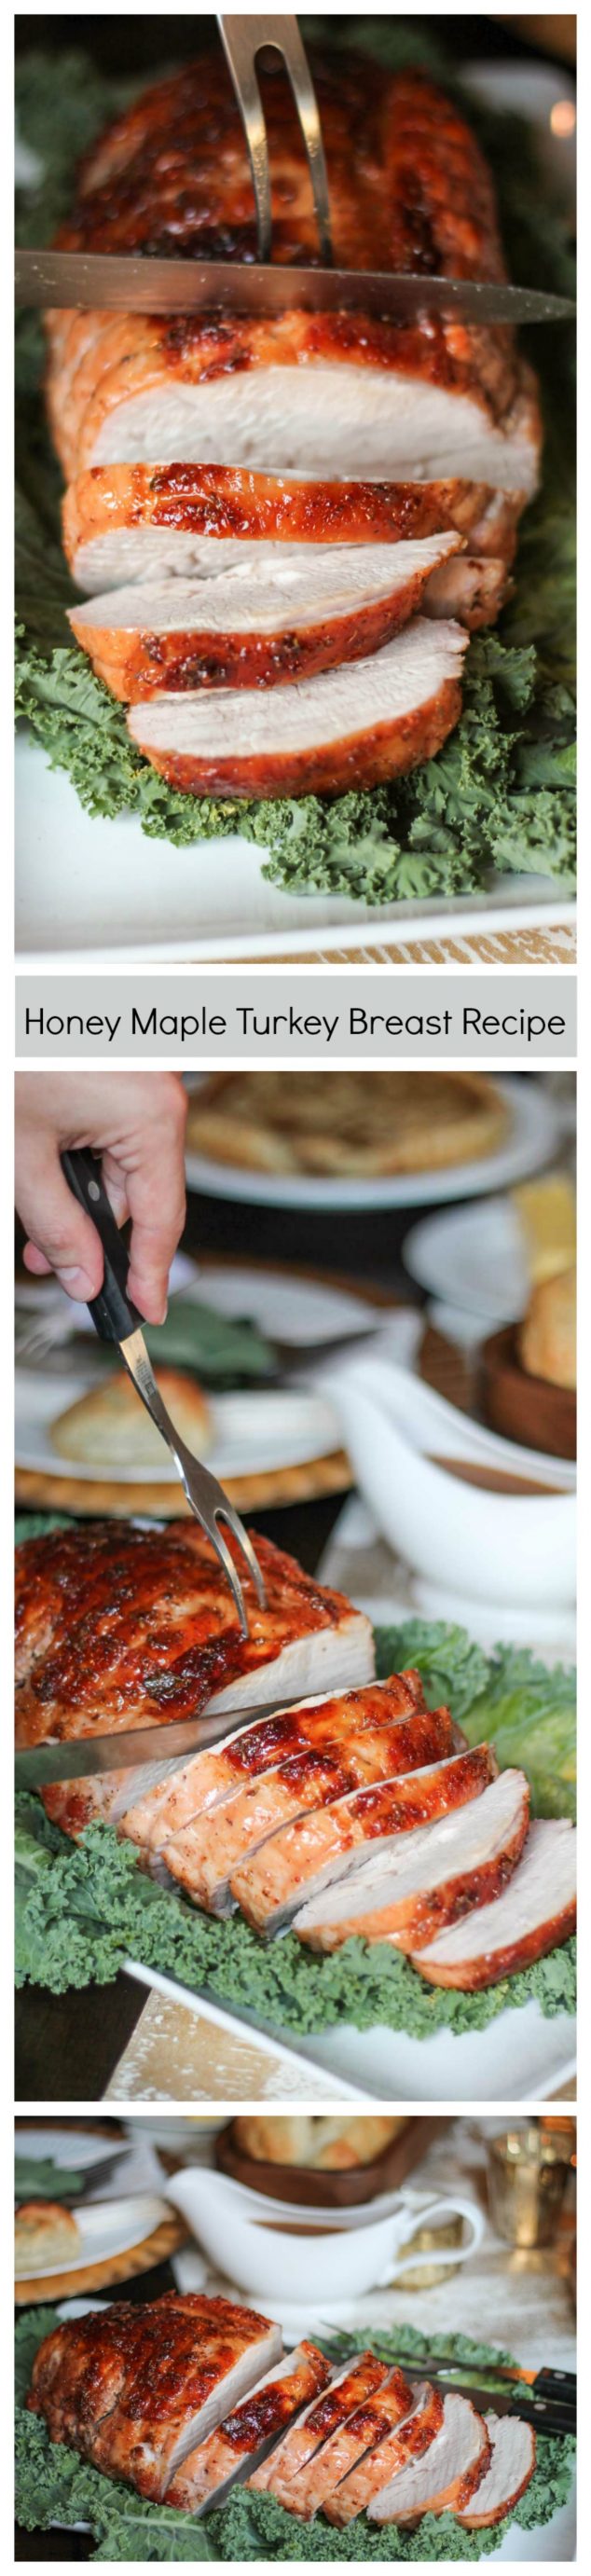 The easiest way to prepare turkey on Thanksgiving day! This delicious foolproof Honey Maple Turkey Breast recipe will be the star of the show on Thanksgiving.